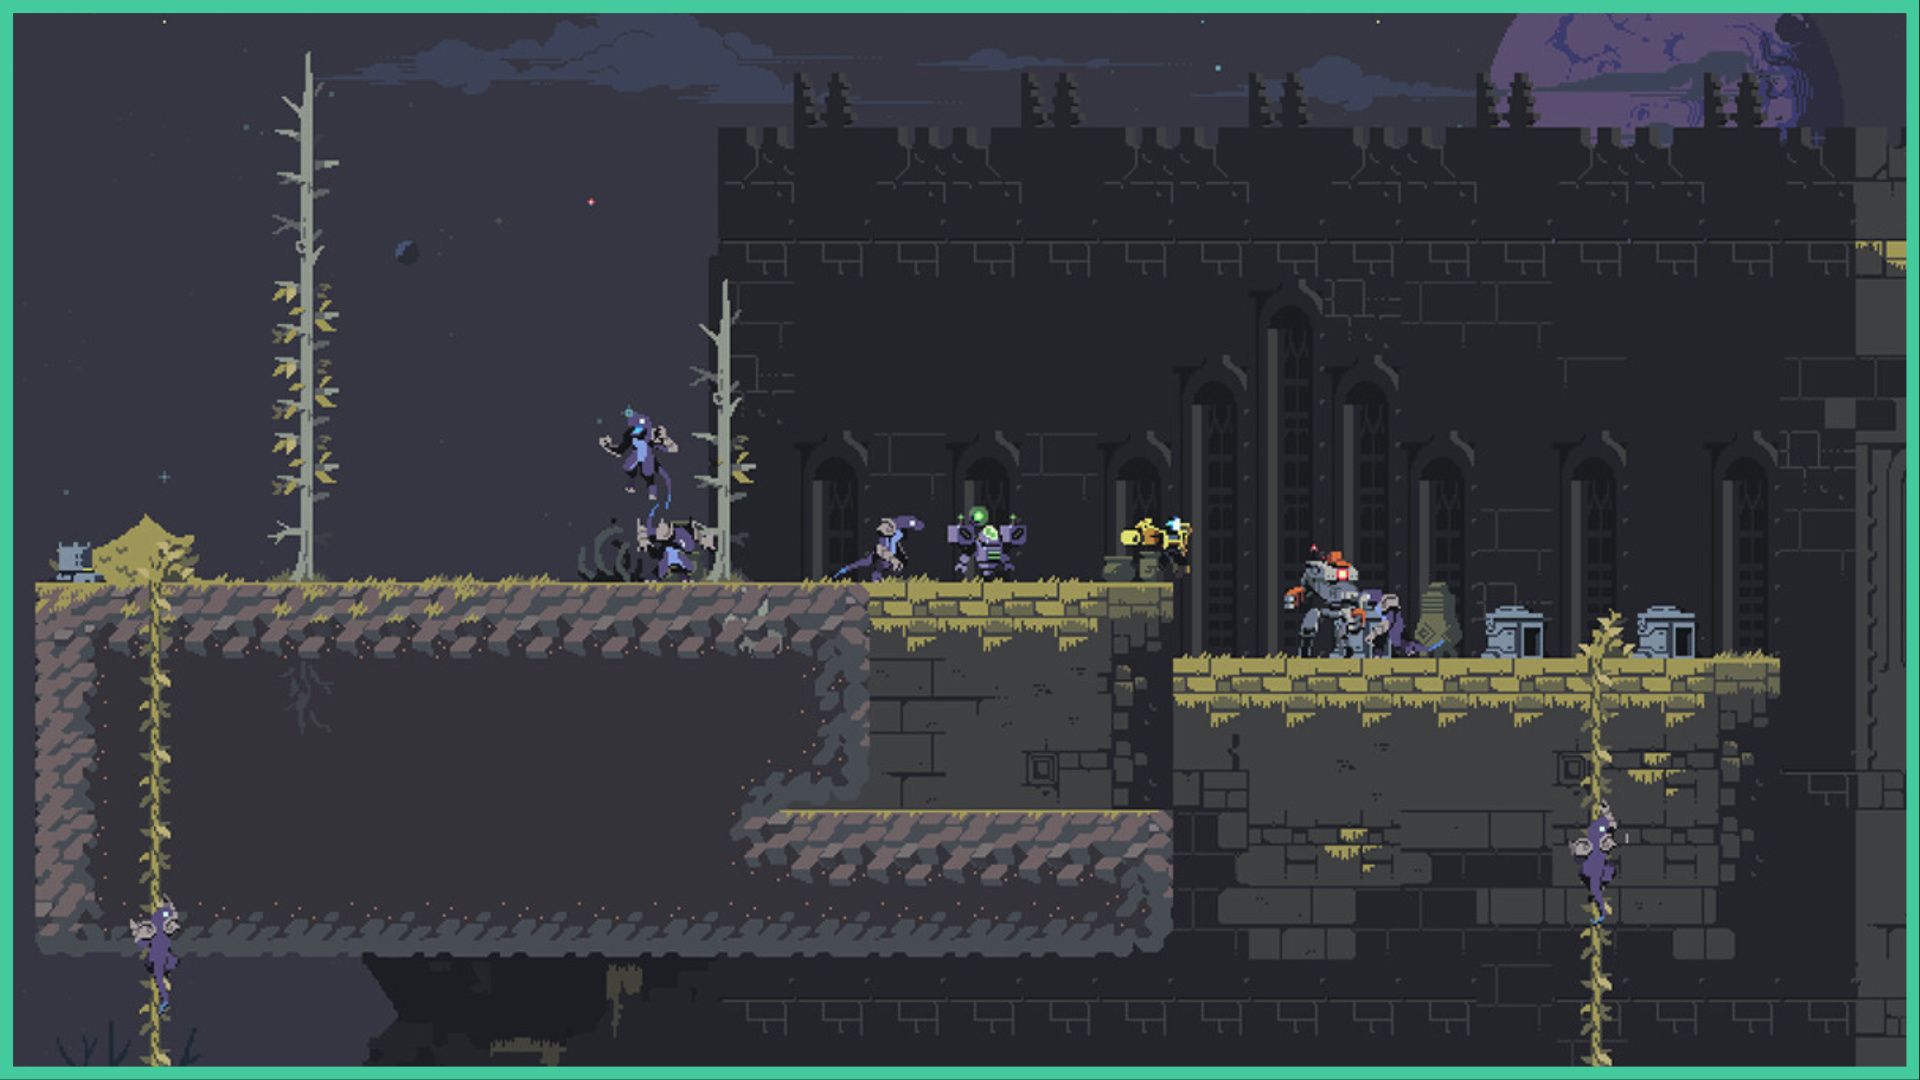 feature image for our risk of rain returns tier list, the image features a screenshot from the game, with multiple enemies standing on one of the platforms as one climbs up some ivy on the wall, there is a stone structure in the background with the moon behind it